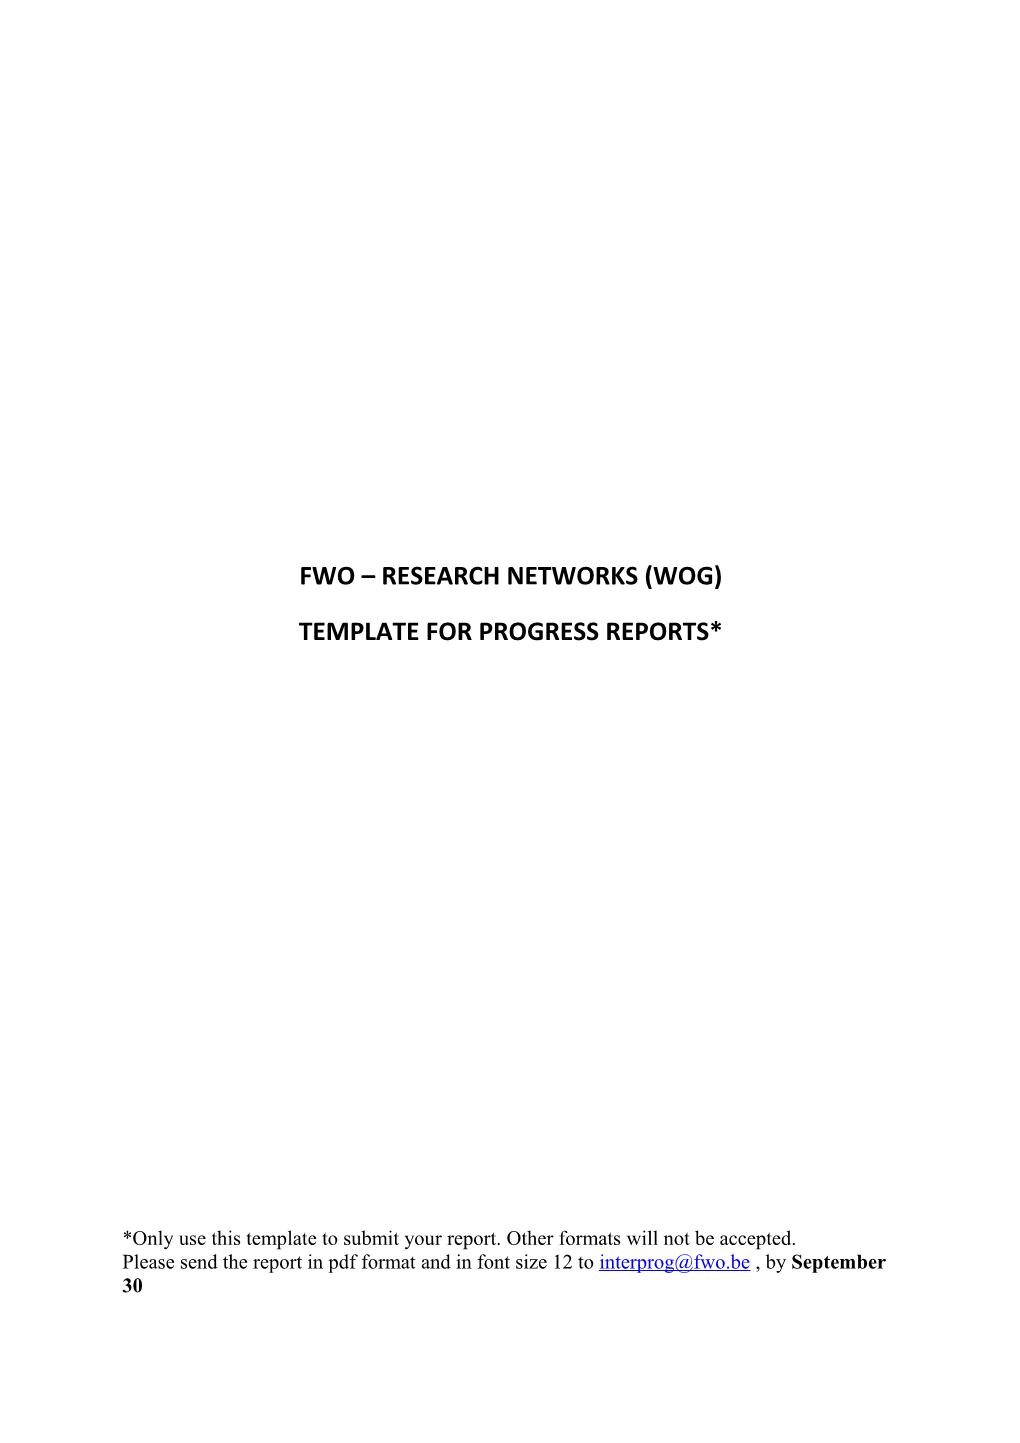 Fwo Research Networks (Wog)